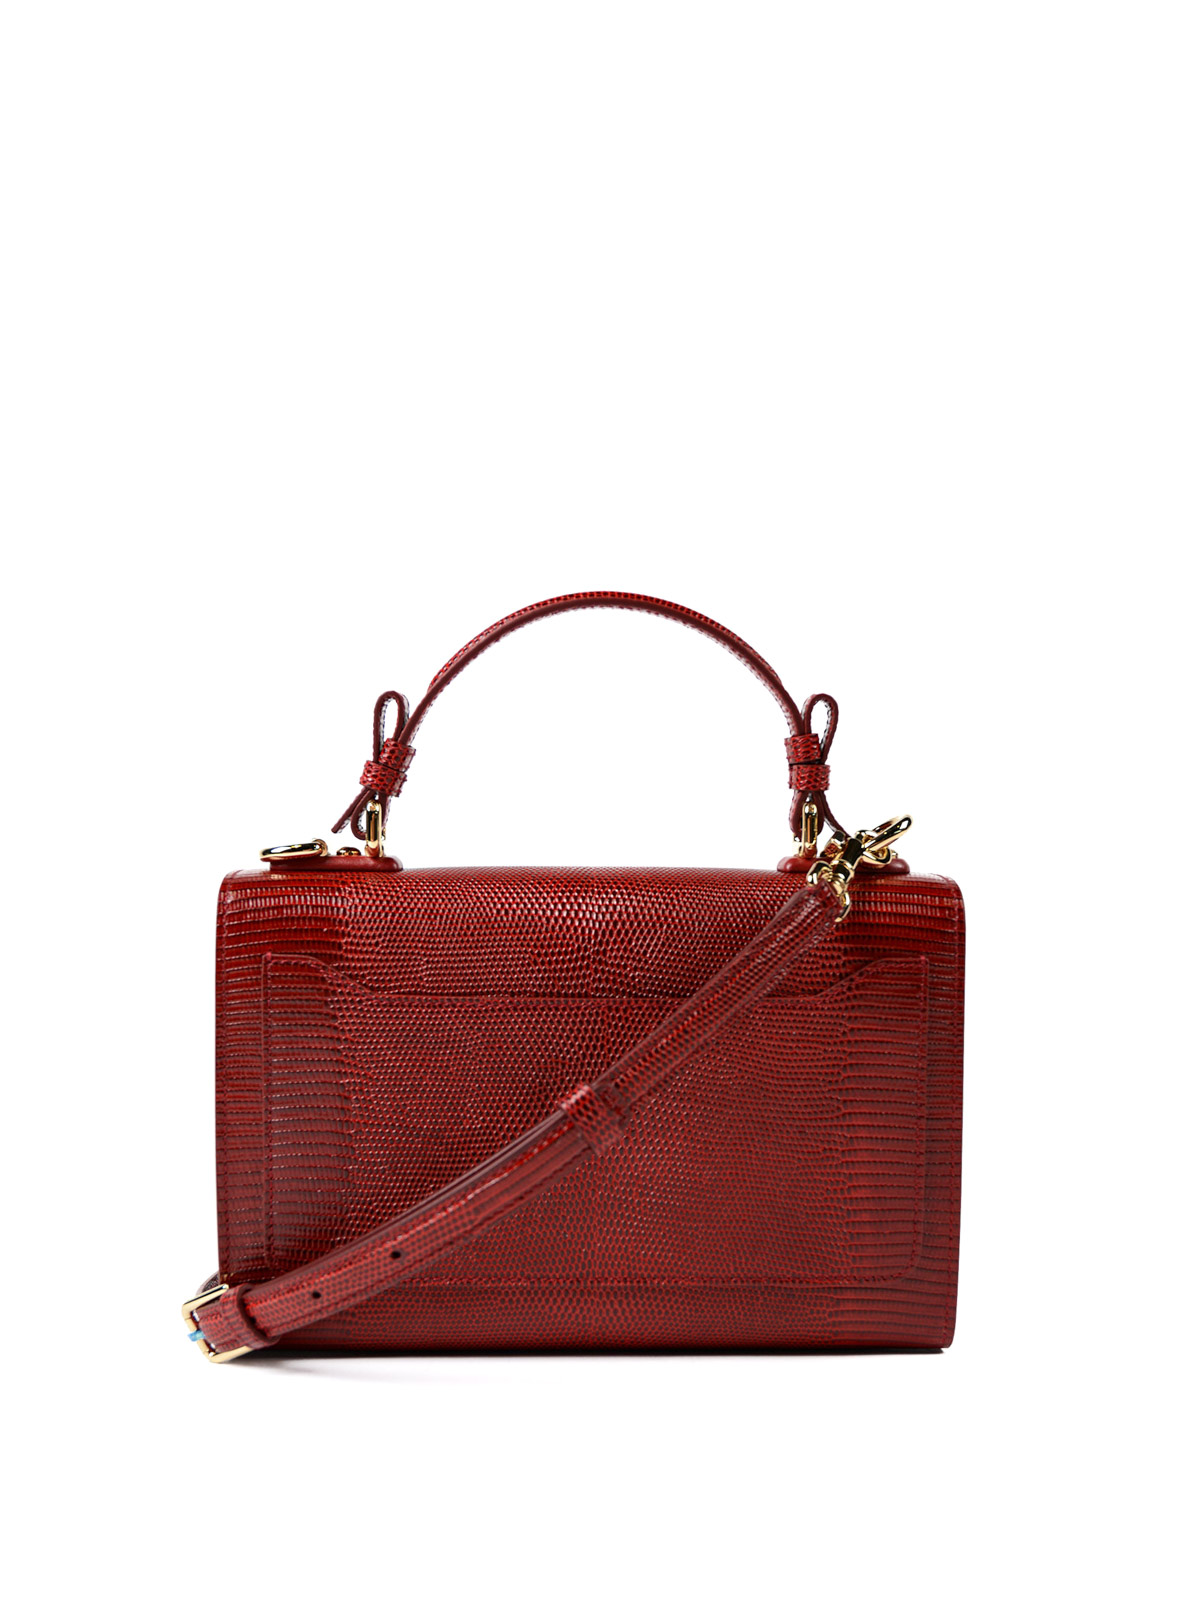 Dolce & Gabbana - Lucia red leather cross body bag - cross body bags - BB6260A109587515